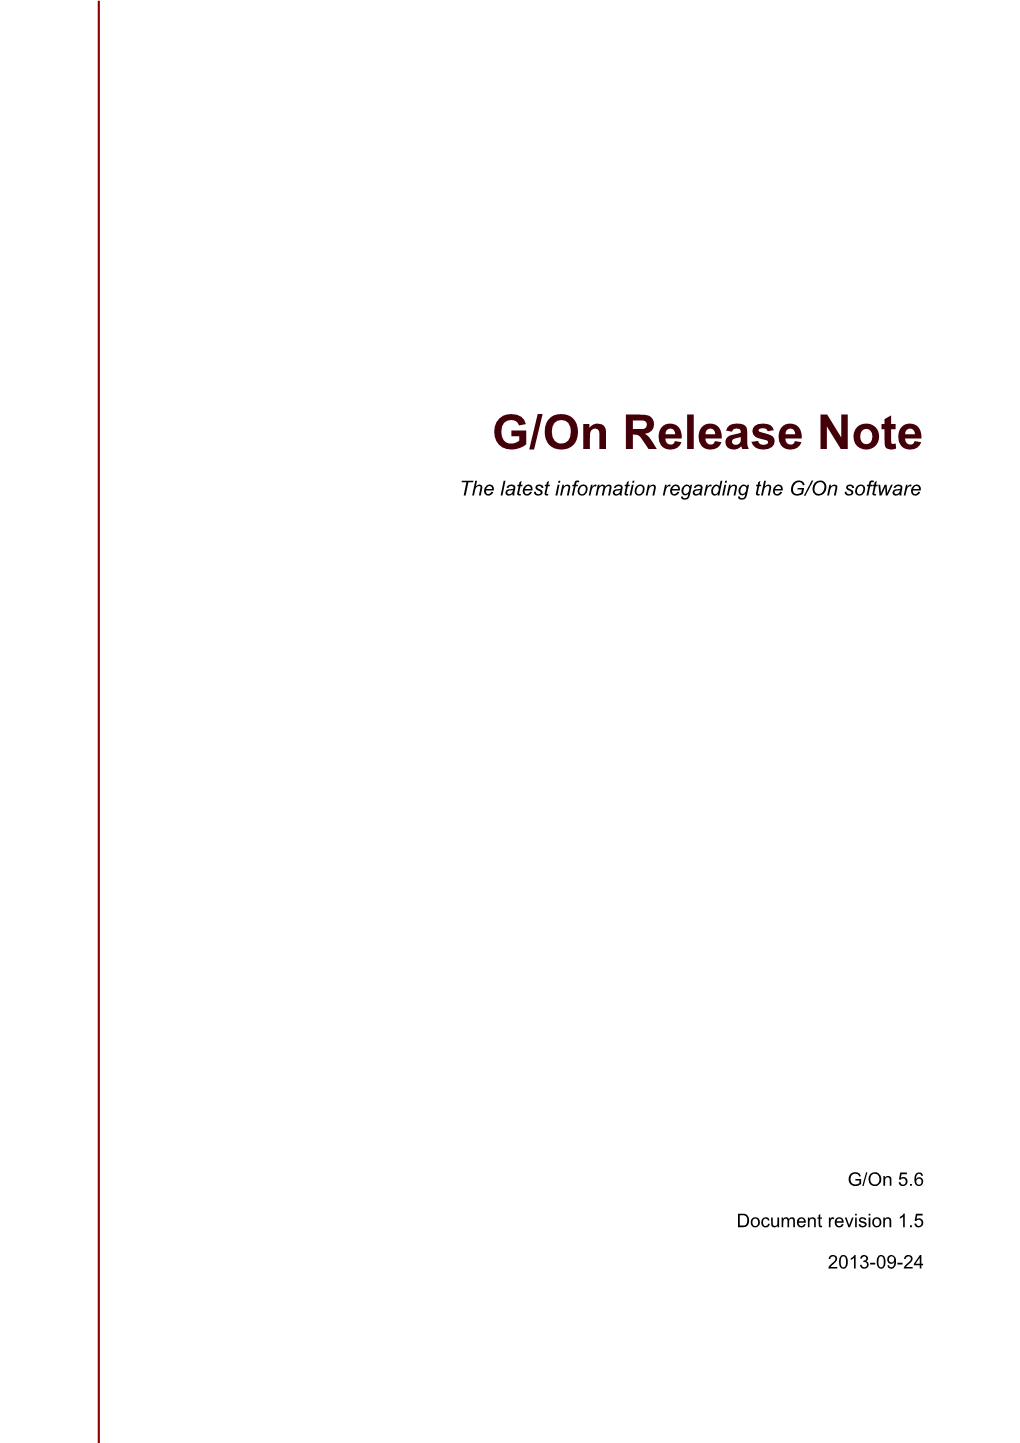 G/On Release Note the Latest Information Regarding the G/On Software